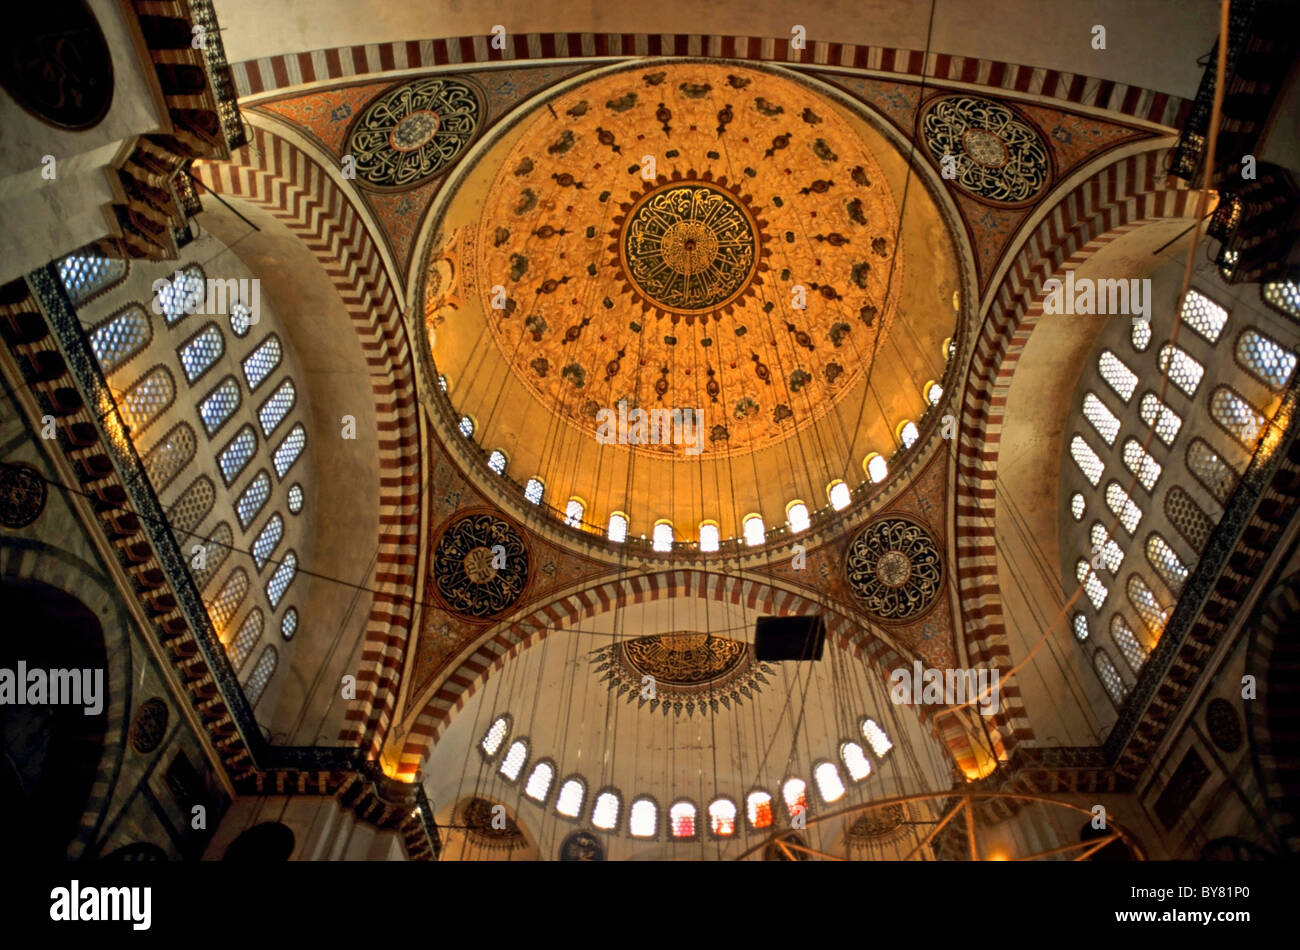 Decorated Dome And Windows Inside The Suleymaniye Mosque An